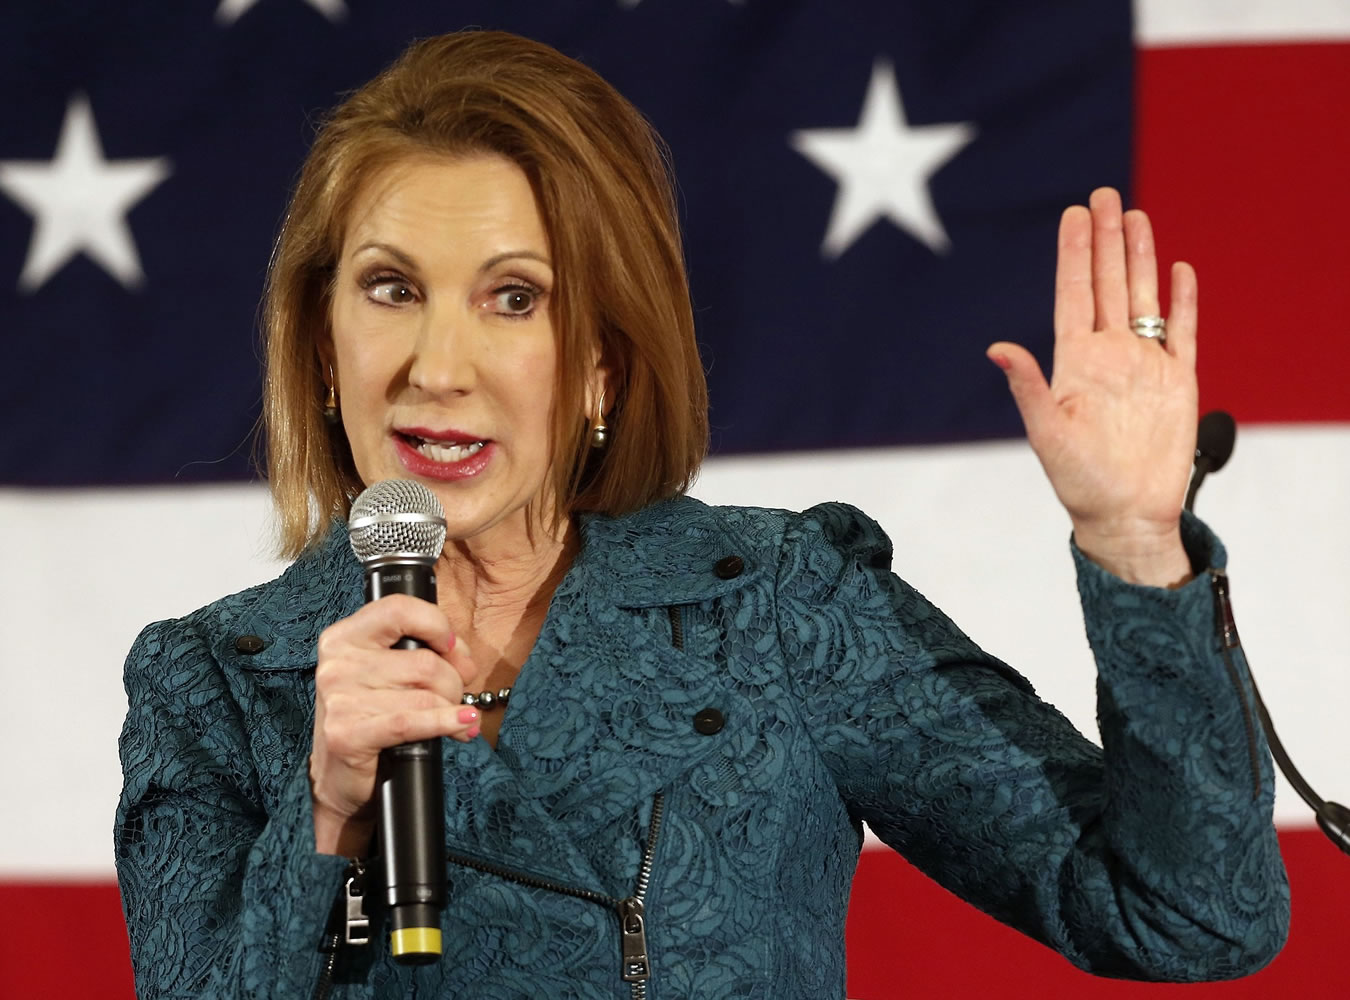 Carly Fiorina speaks April 18 at the Republican Leadership Summit in Nashua, N.H.